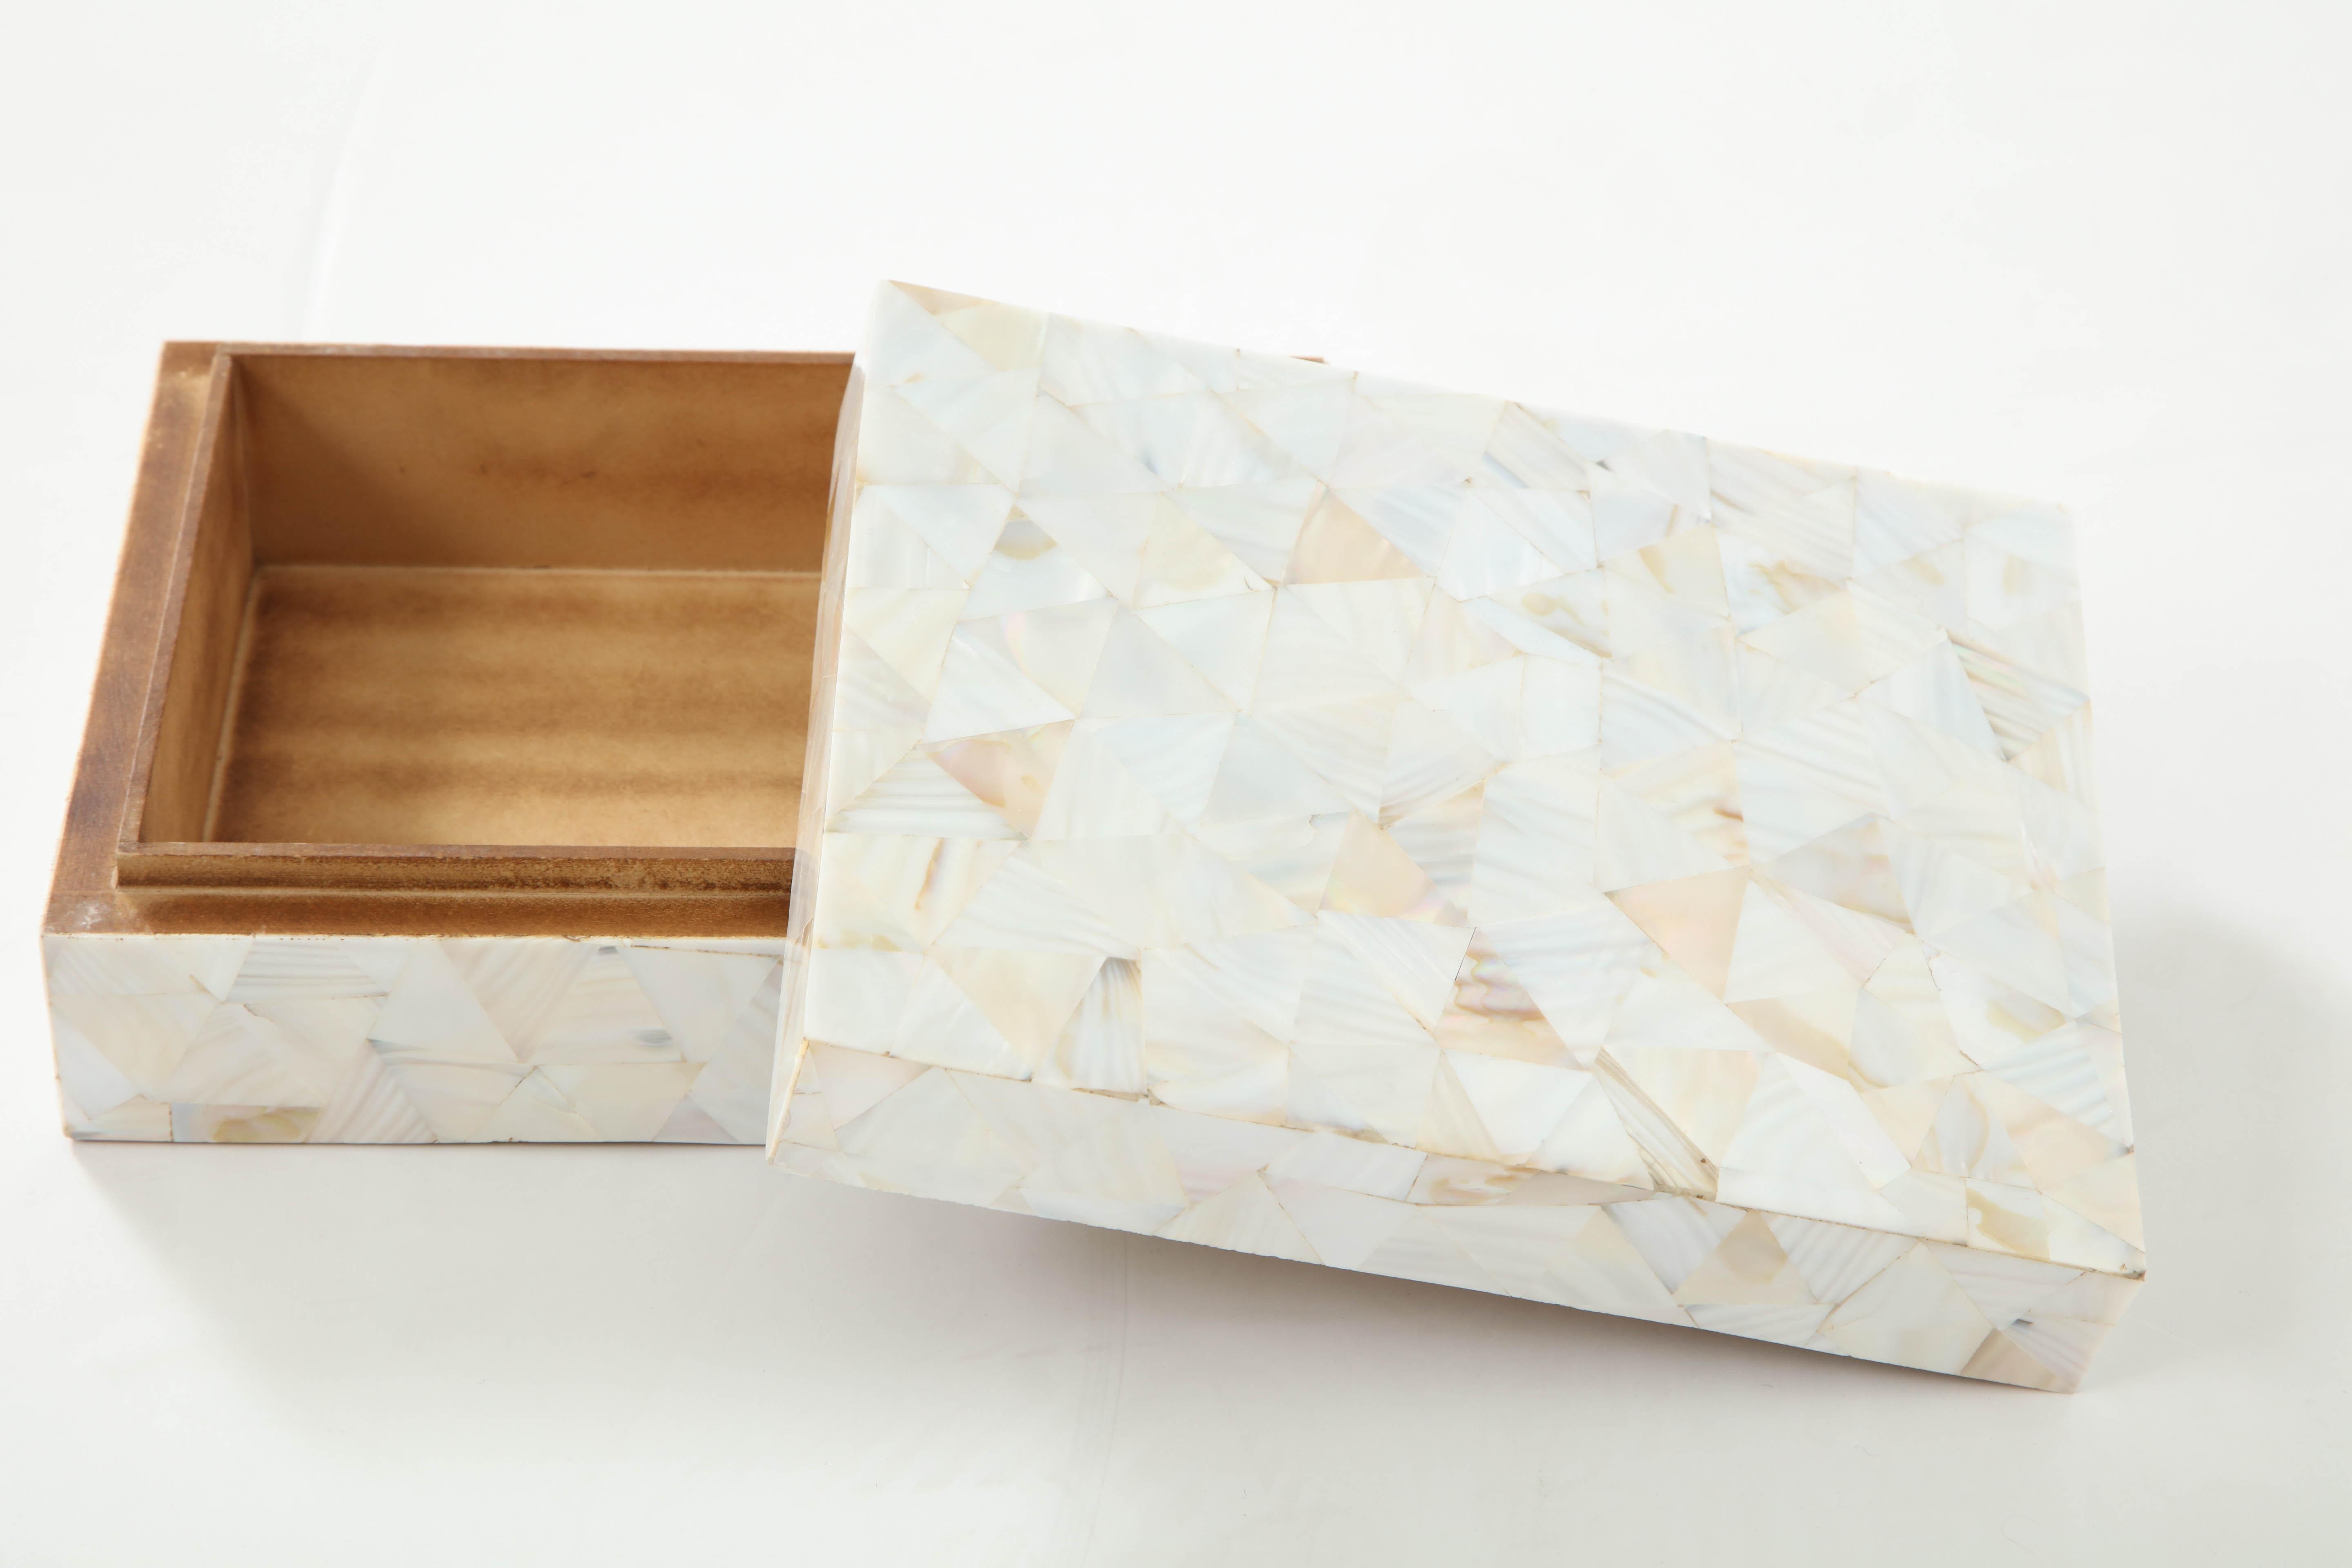 Mother-of-Pearl mosaic decorative box lined in wood.